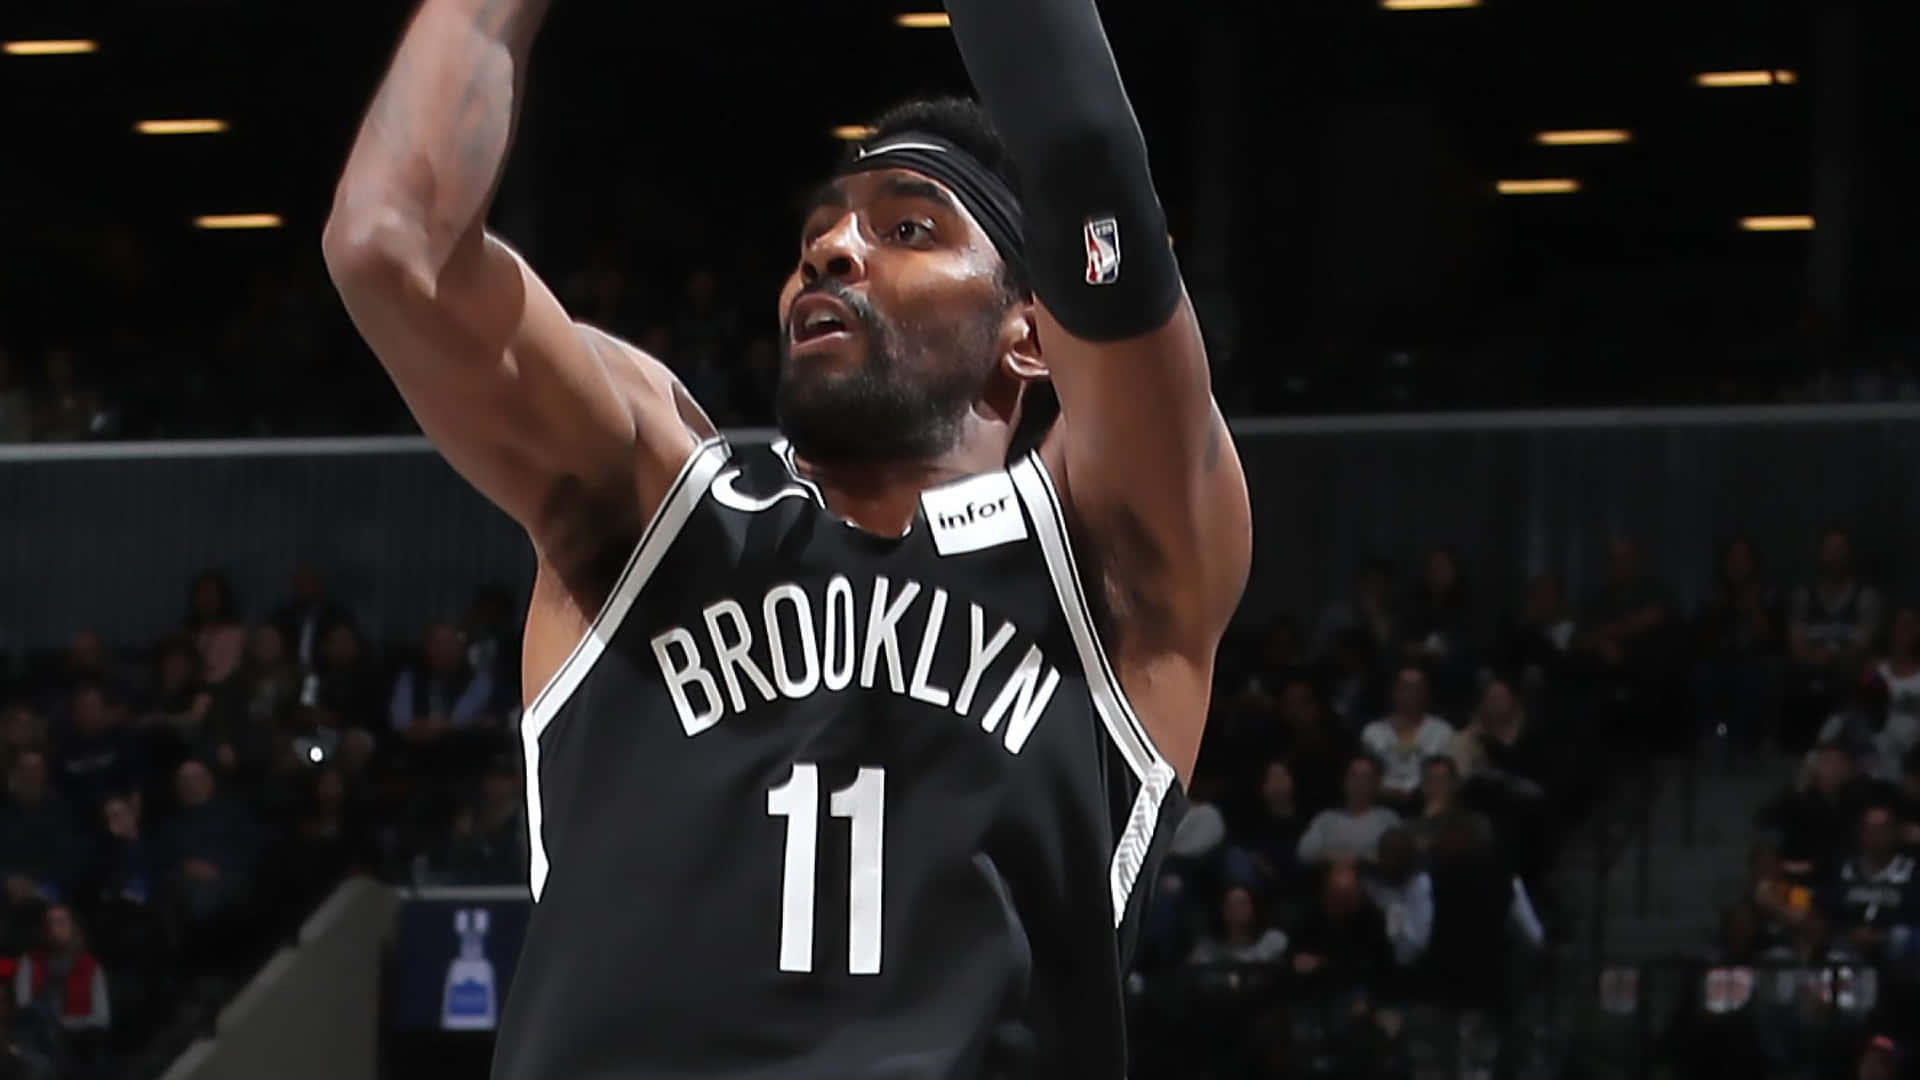 Kyrie Irving Joins the Nets Wallpaper